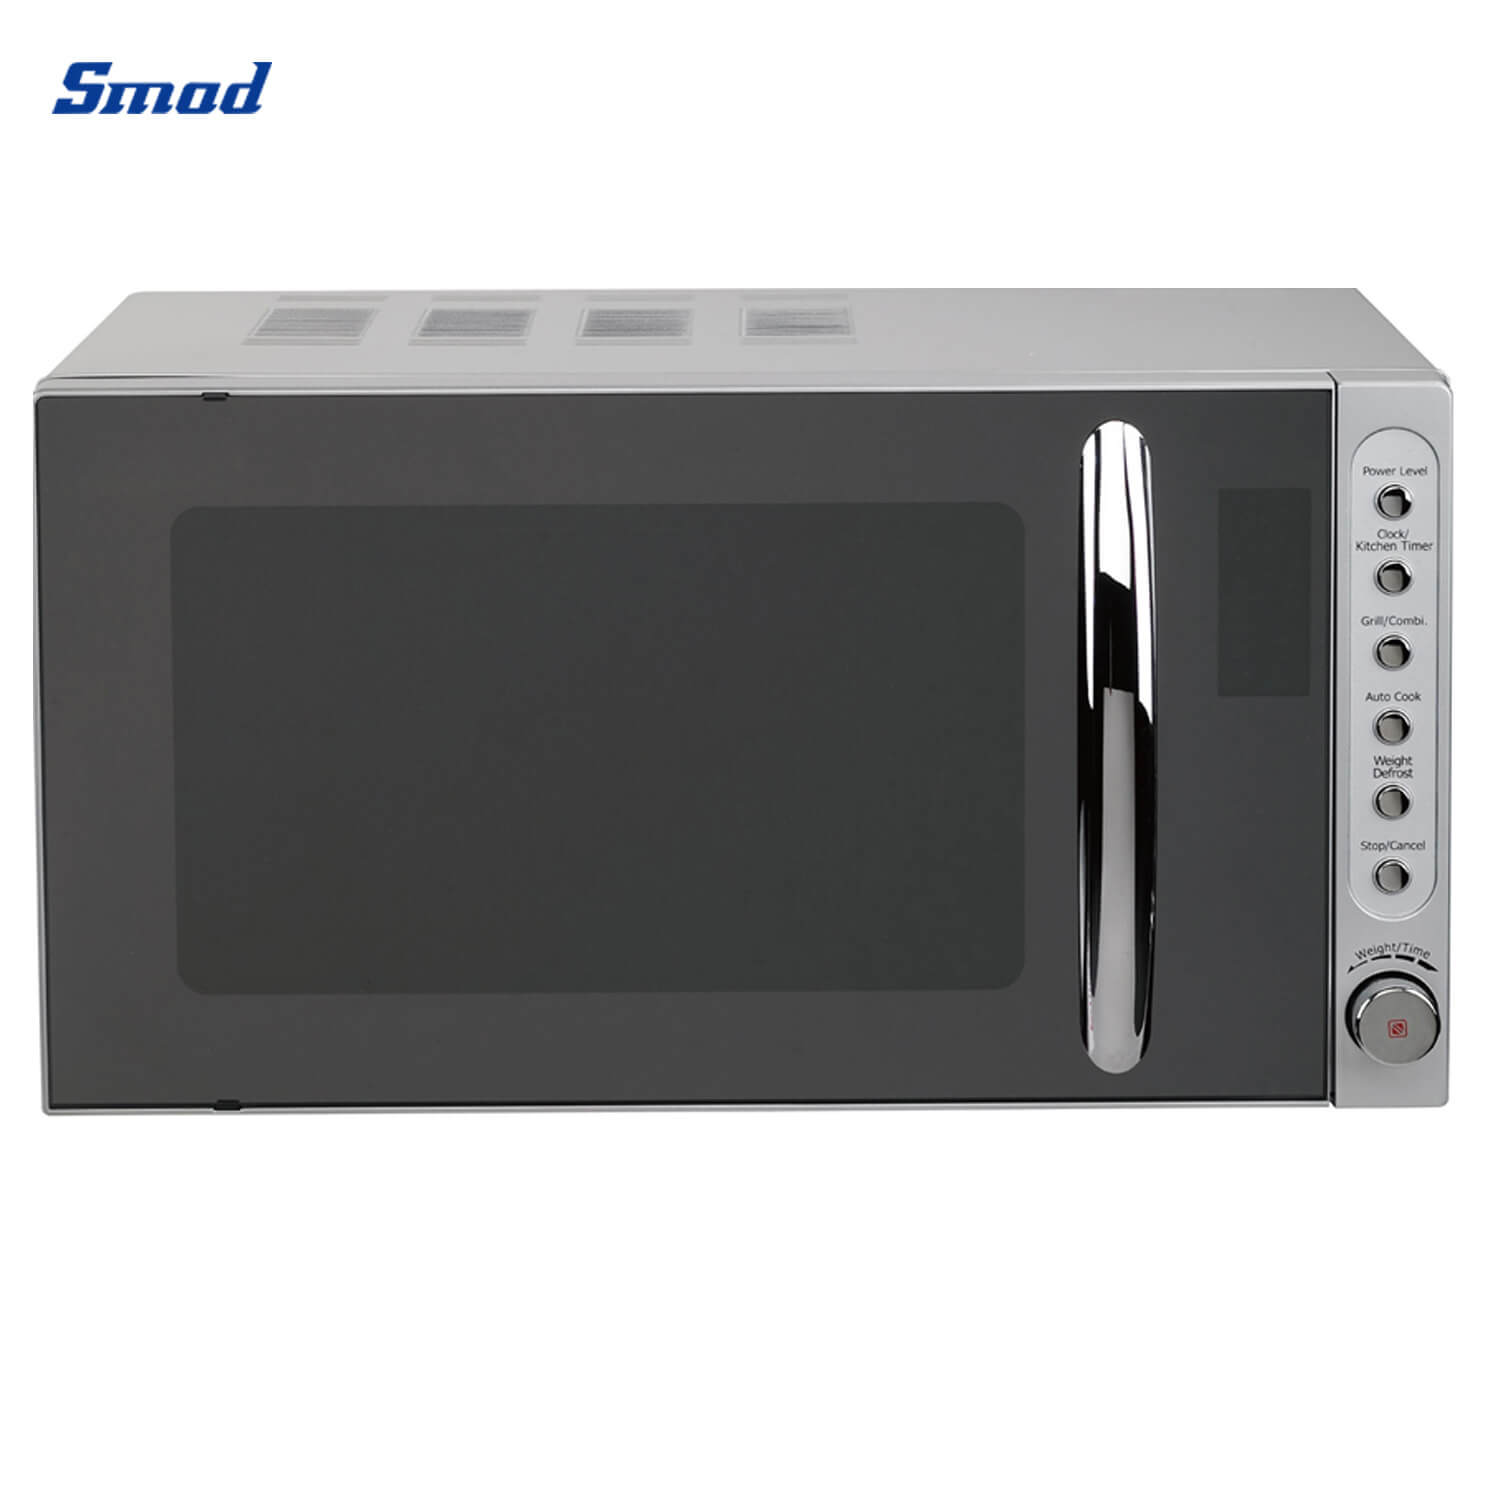 
Smad 34L 1000W Compact Microwave with Express cooking